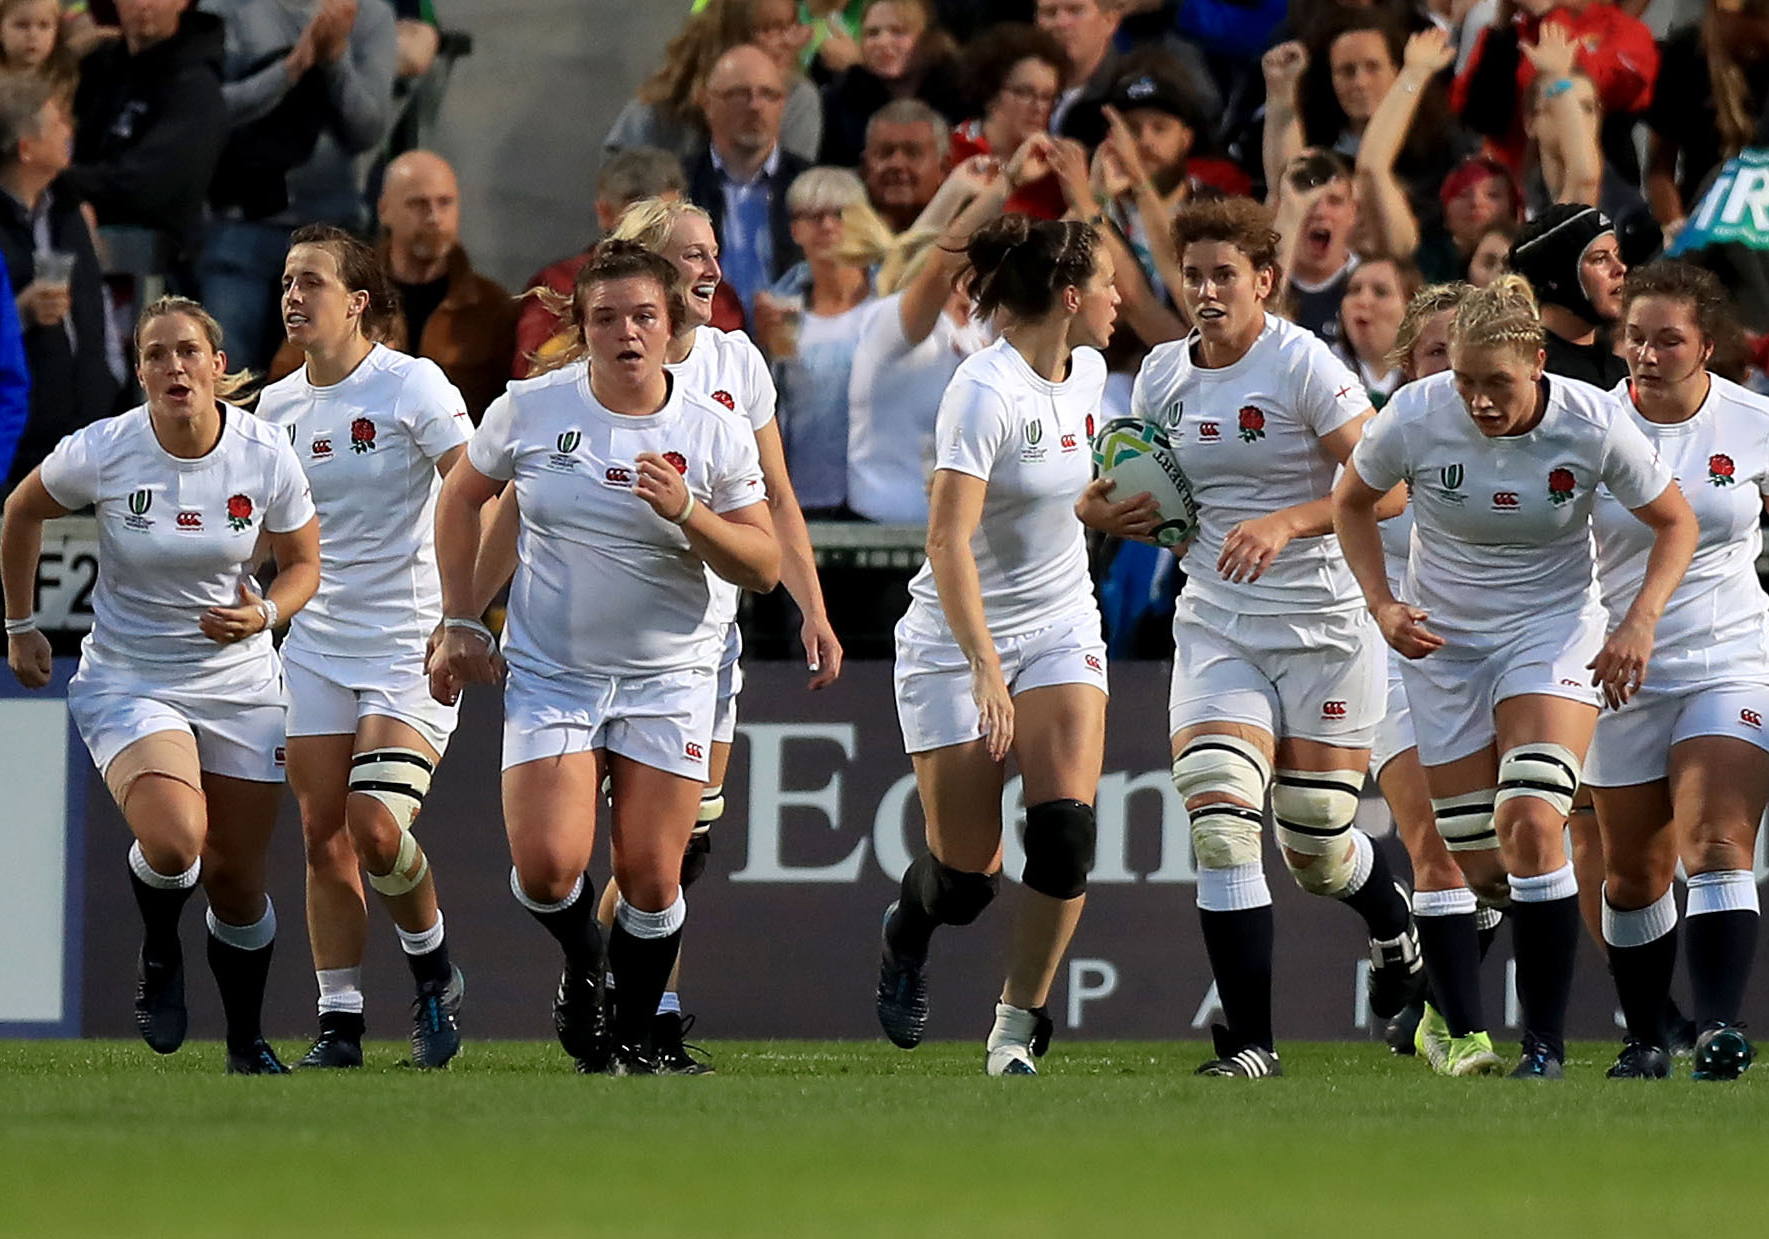 The England Women's rugby team (Donall Farmer/PA)